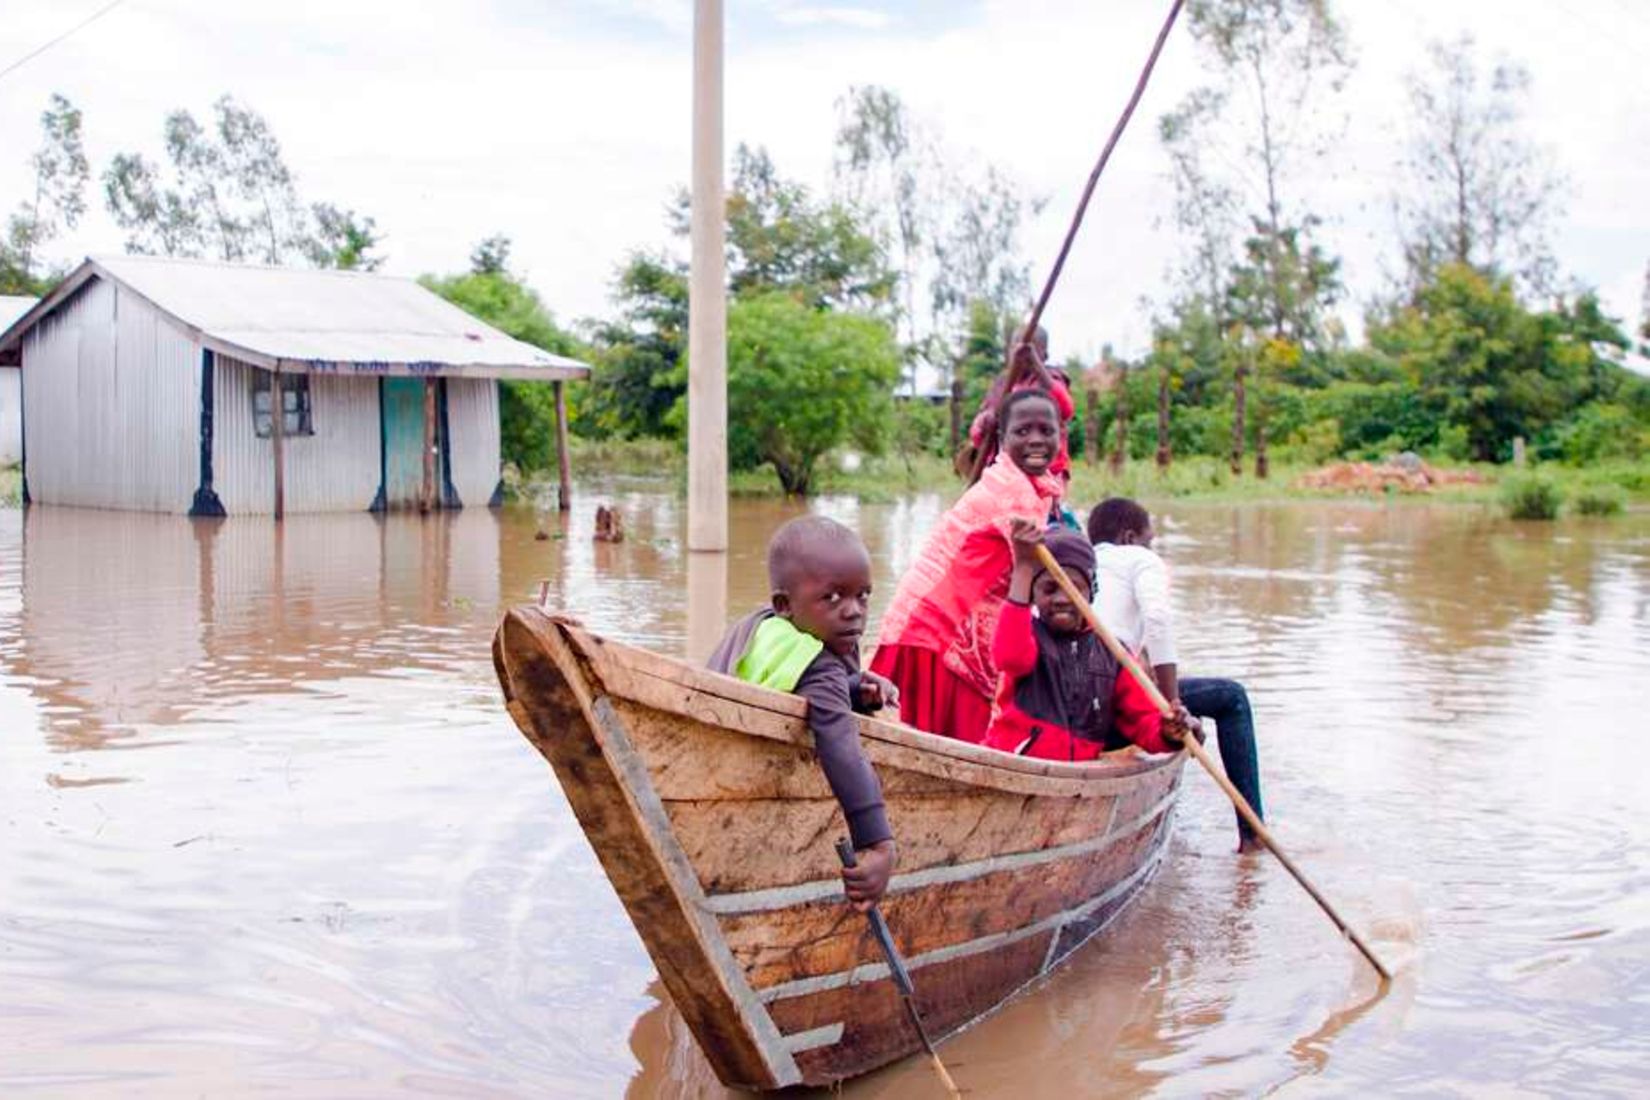 Kenya hit by floods after heavy rains | Nation